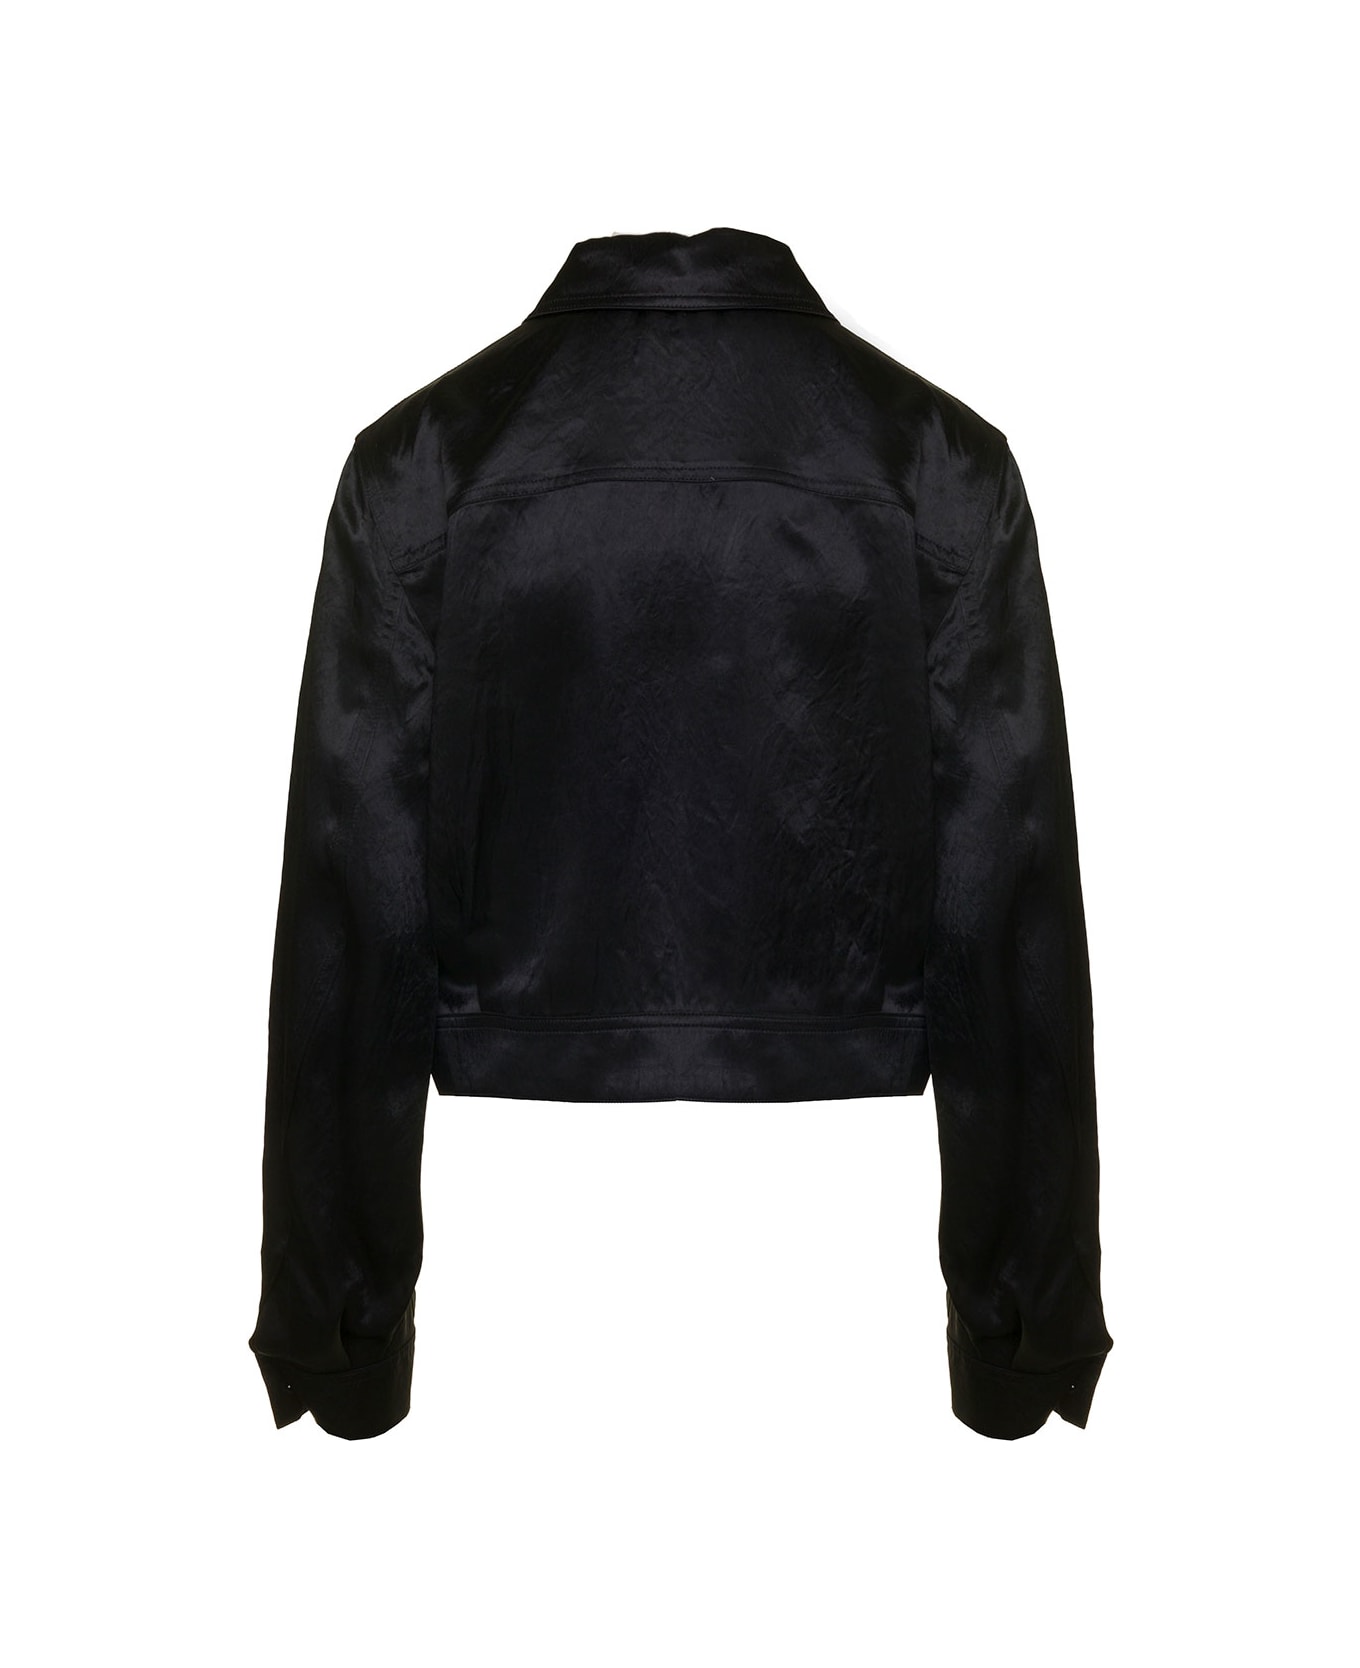 Theory Black Cropped Shirt With Buttons In Satin Fabric Woman - Nero